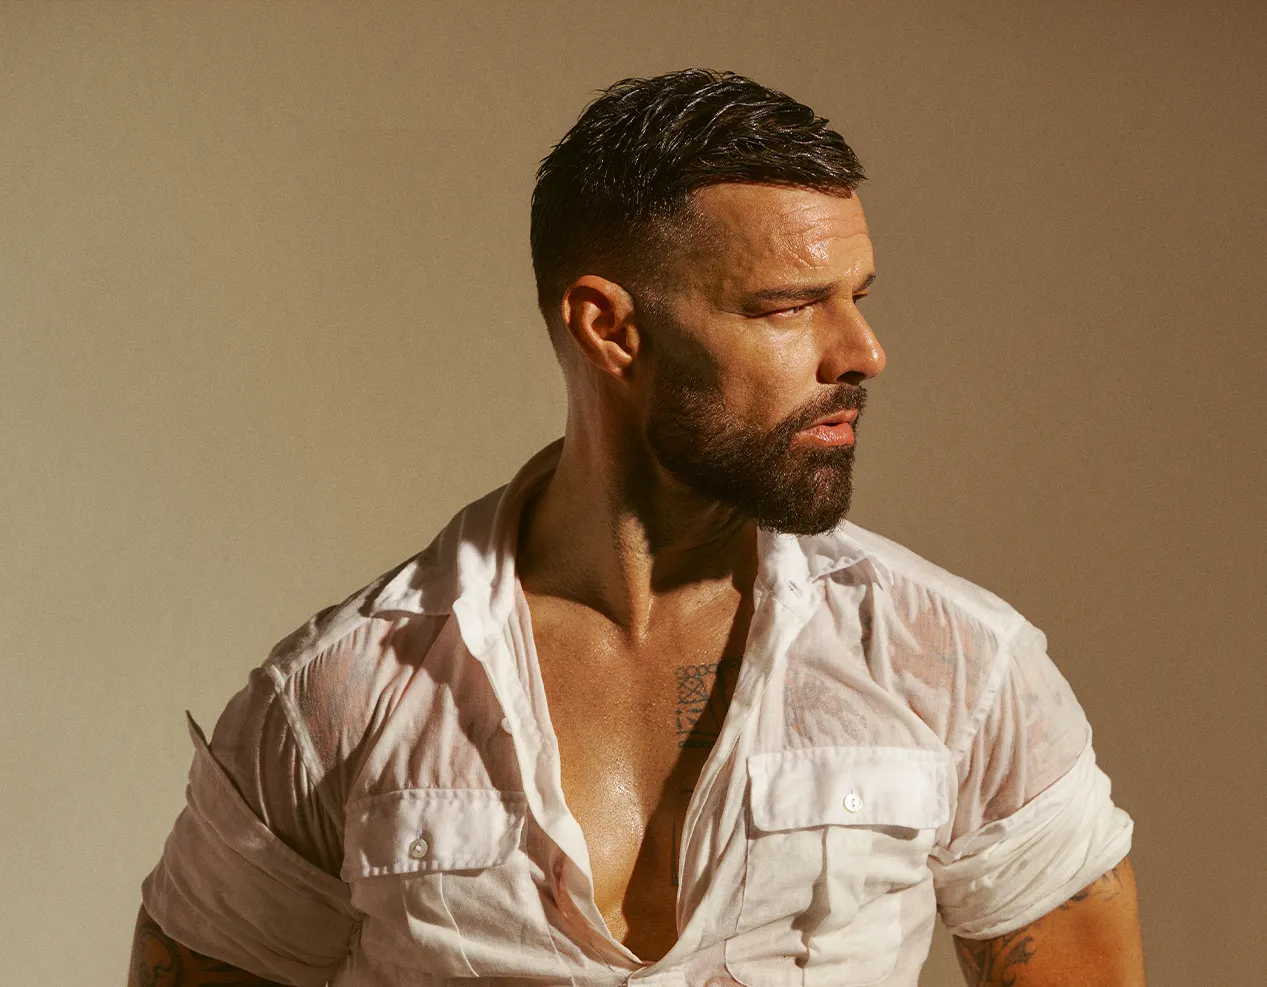 “I wish I could come out 20 times.” Ricky Martin reveals coming out “felt amazing”